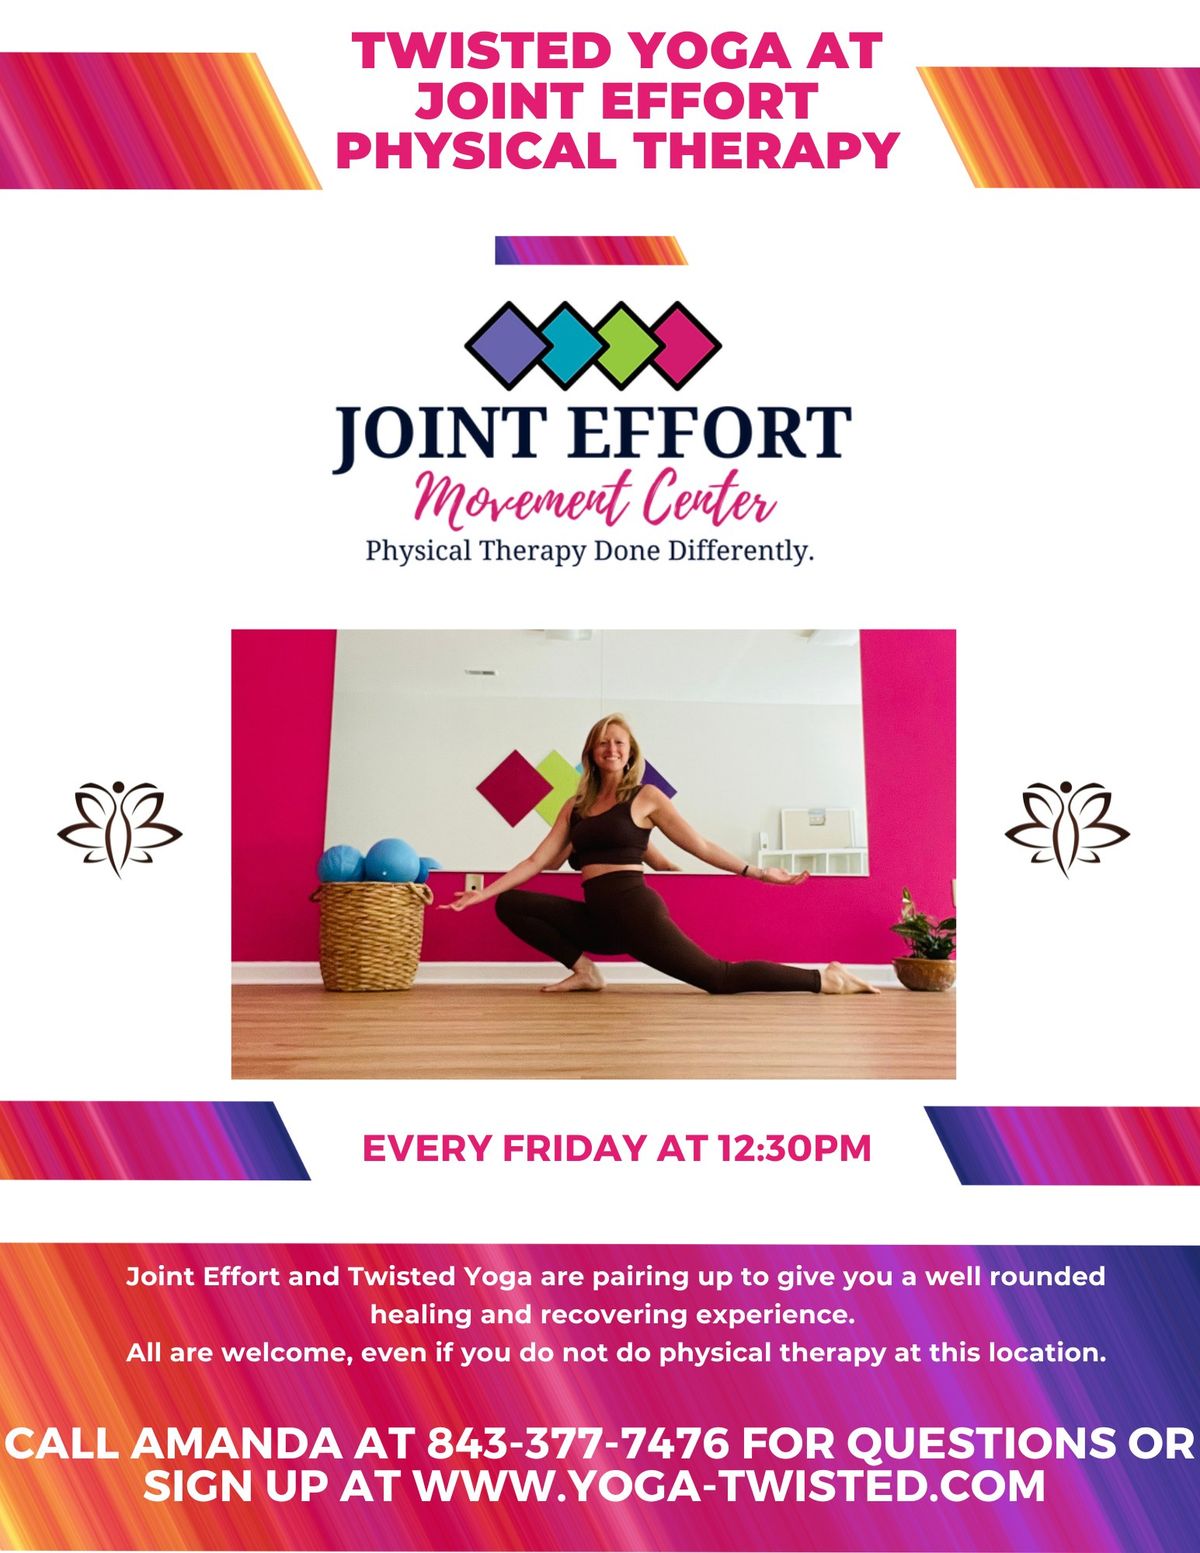 Twisted Yoga at Joint Effort Physical Therapy